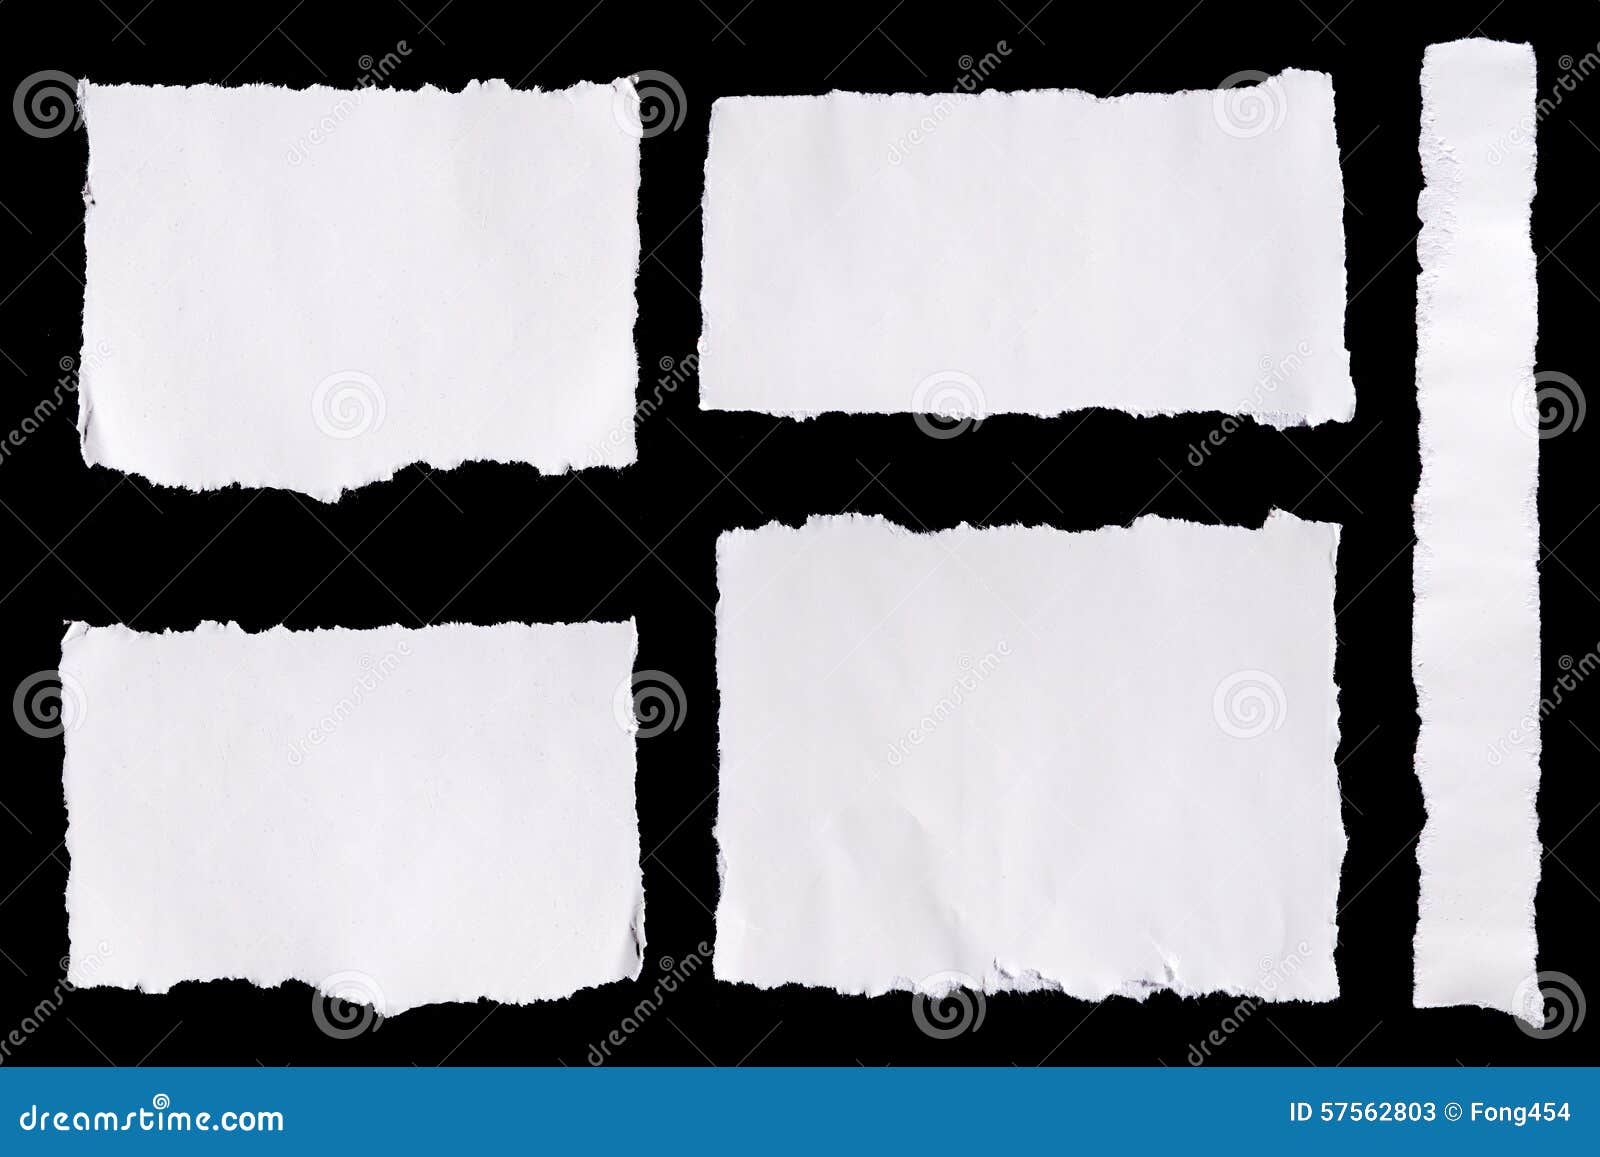 collection of white ripped pieces of paper on black background